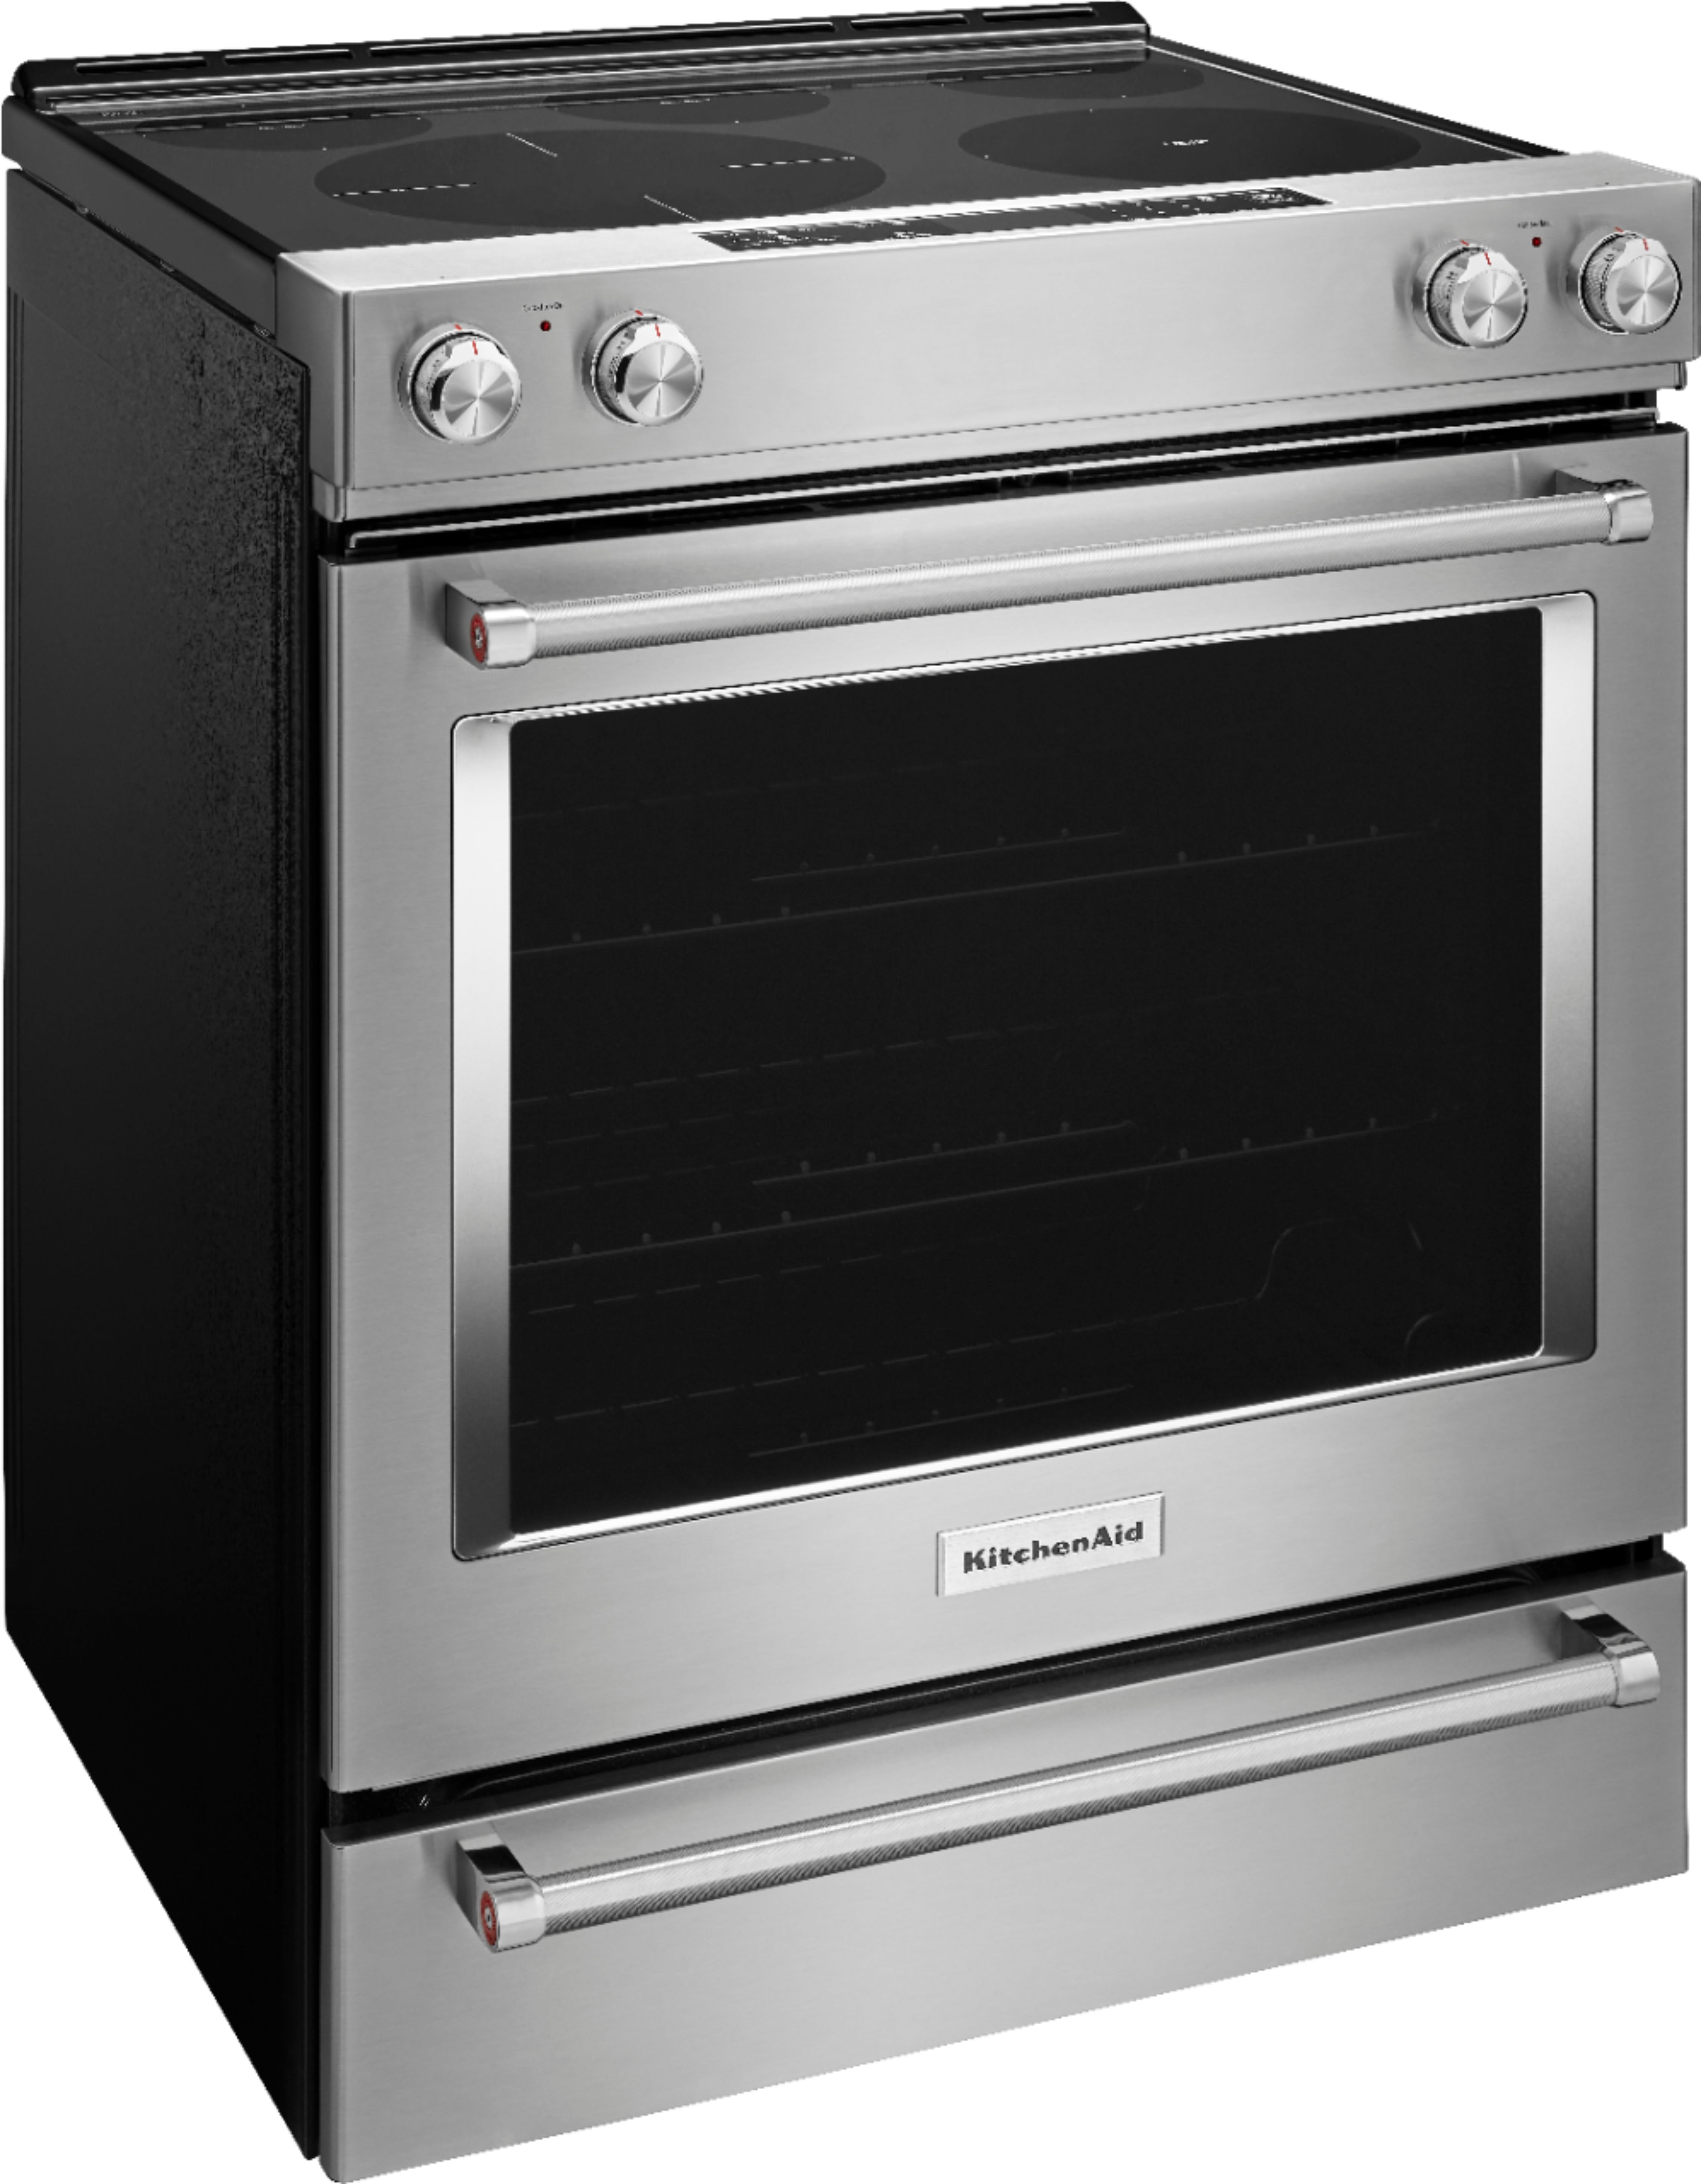 Angle View: KitchenAid - 6.4 Cu. Ft. Self-Cleaning Slide-In Electric Convection Range - Black stainless steel